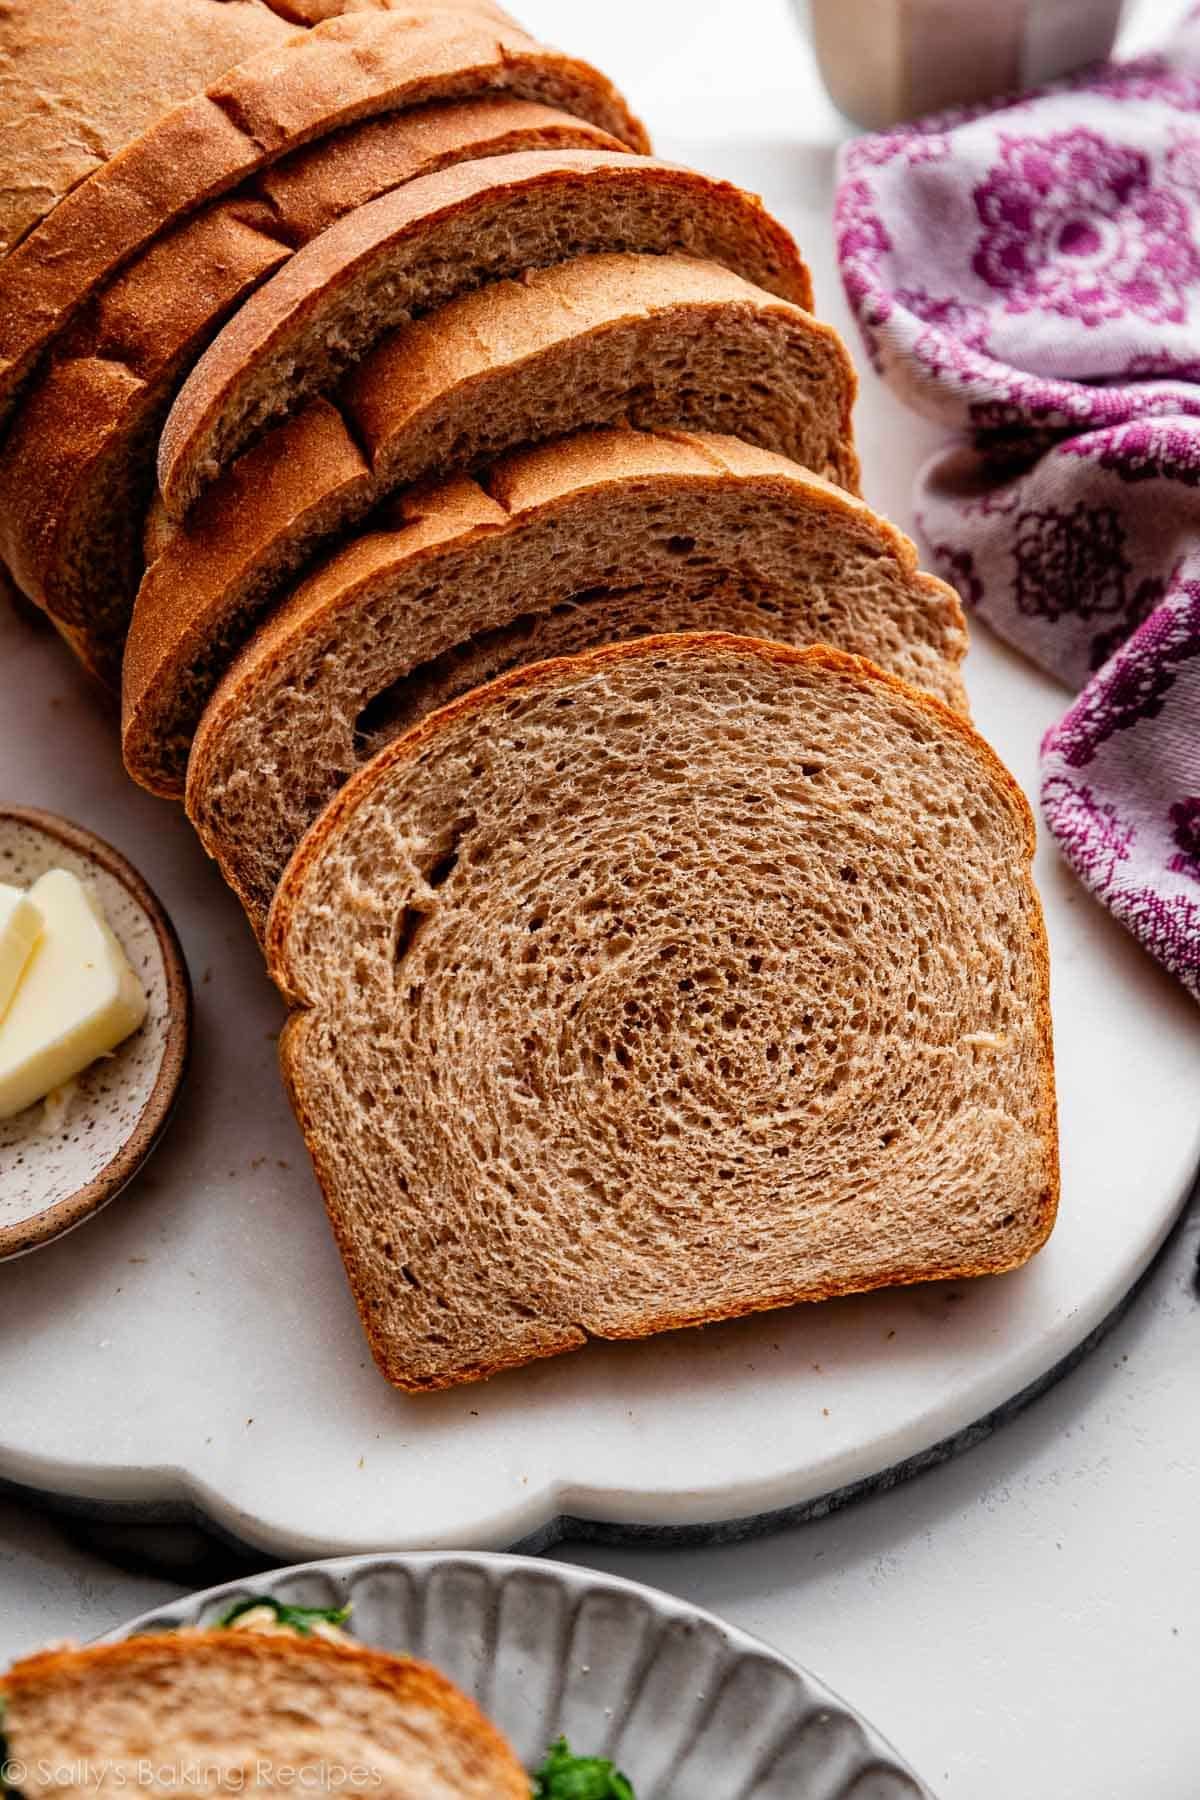 slices of whole wheat bread on marble surface with purple linen on the side.